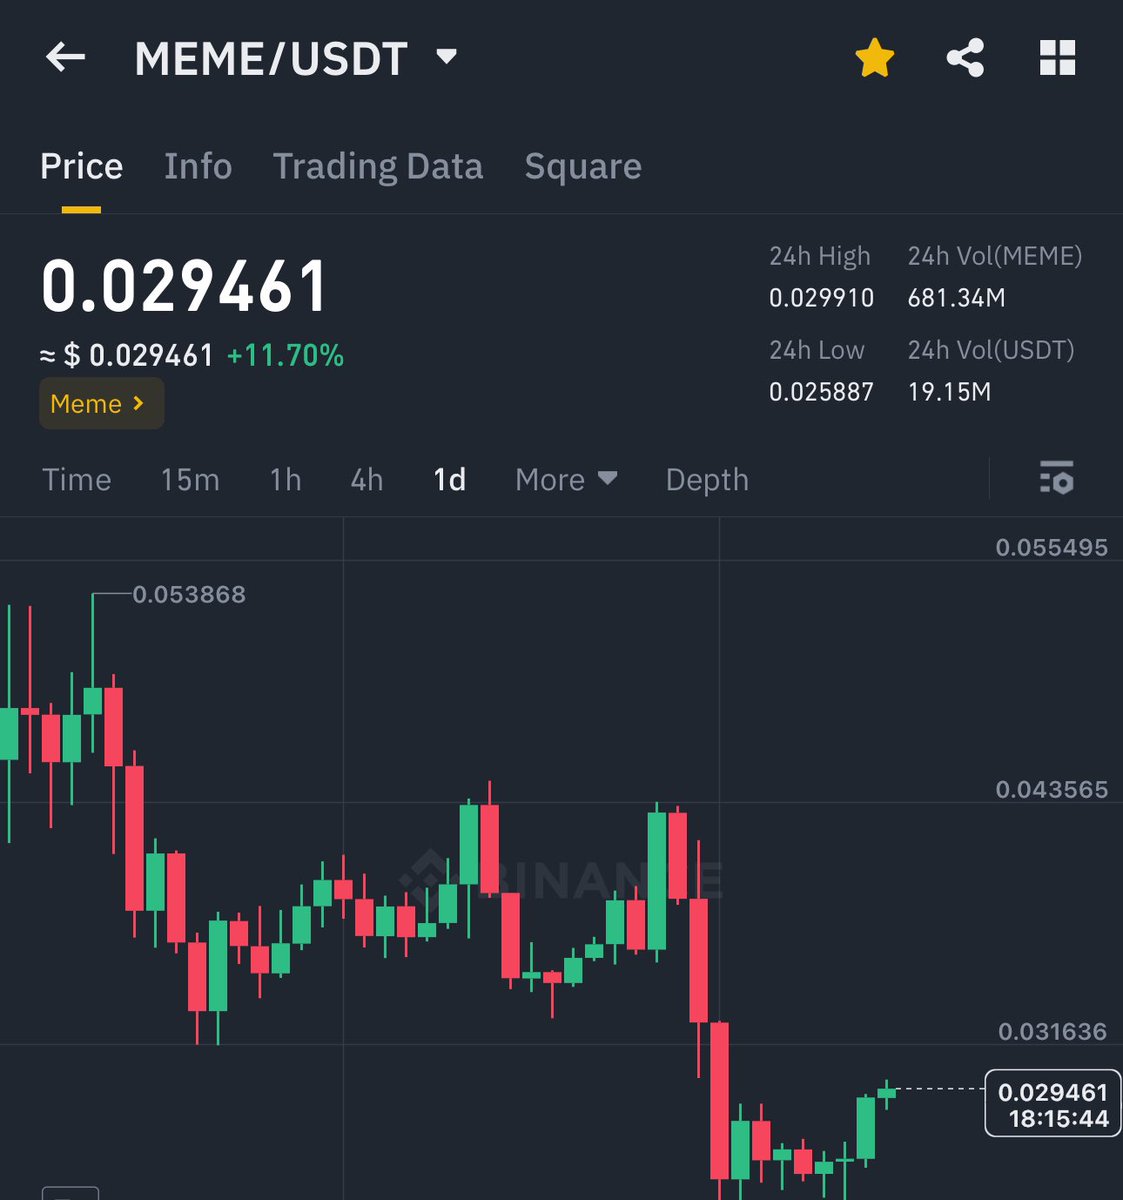 $MEME gonna hit 0.06$-0.09$ in coming month ✅